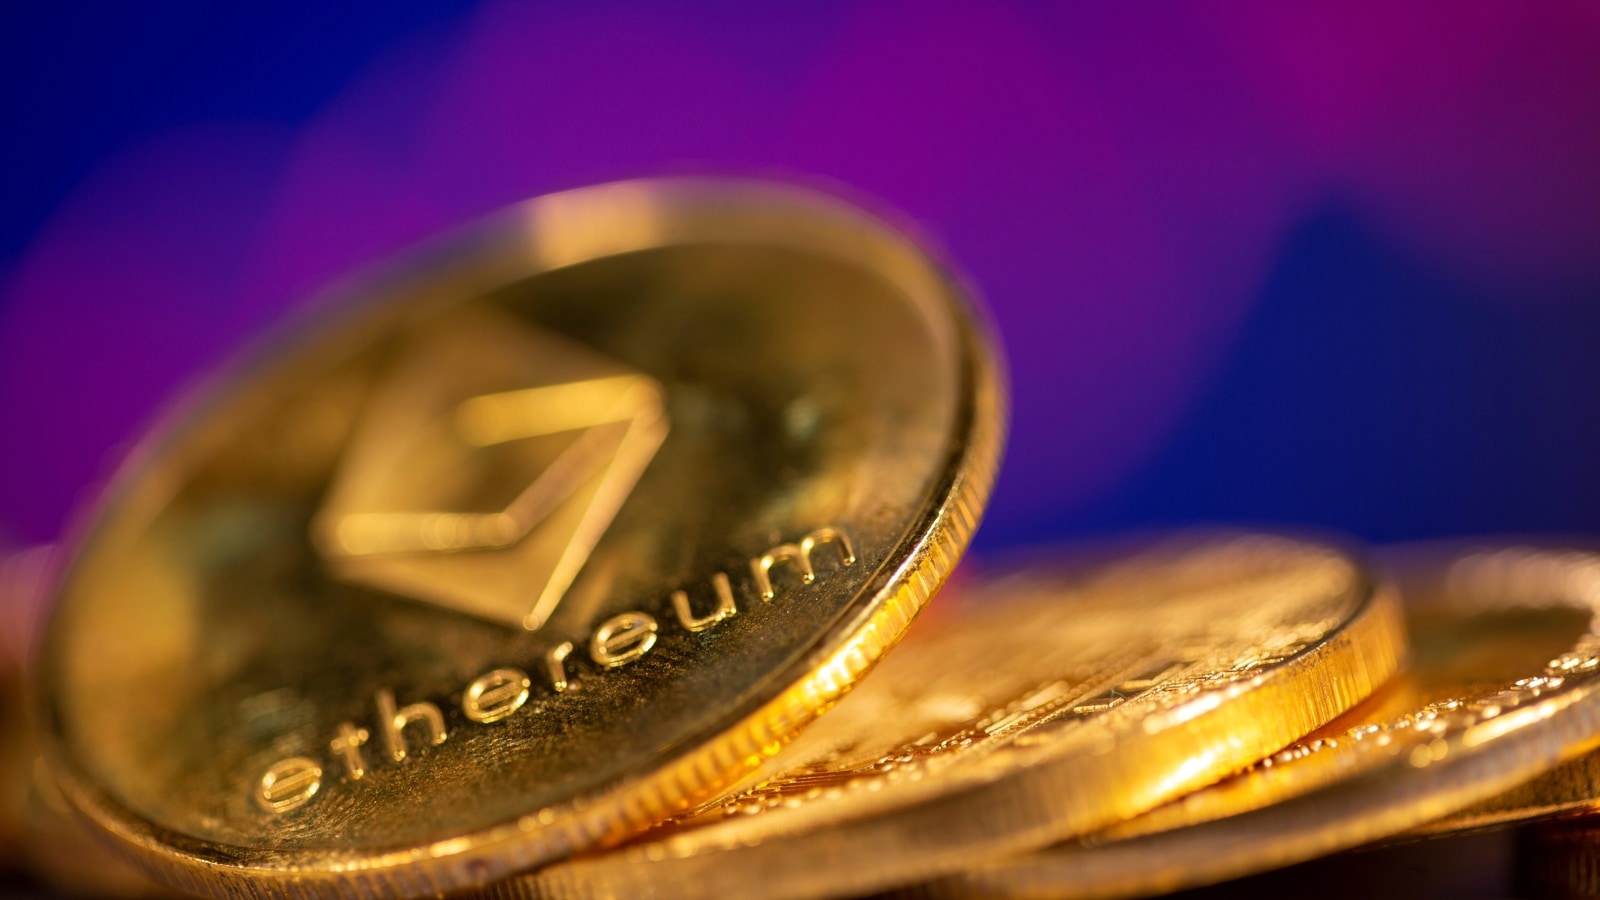 Norton Crypto lets customers mine Ethereum, adds online ...